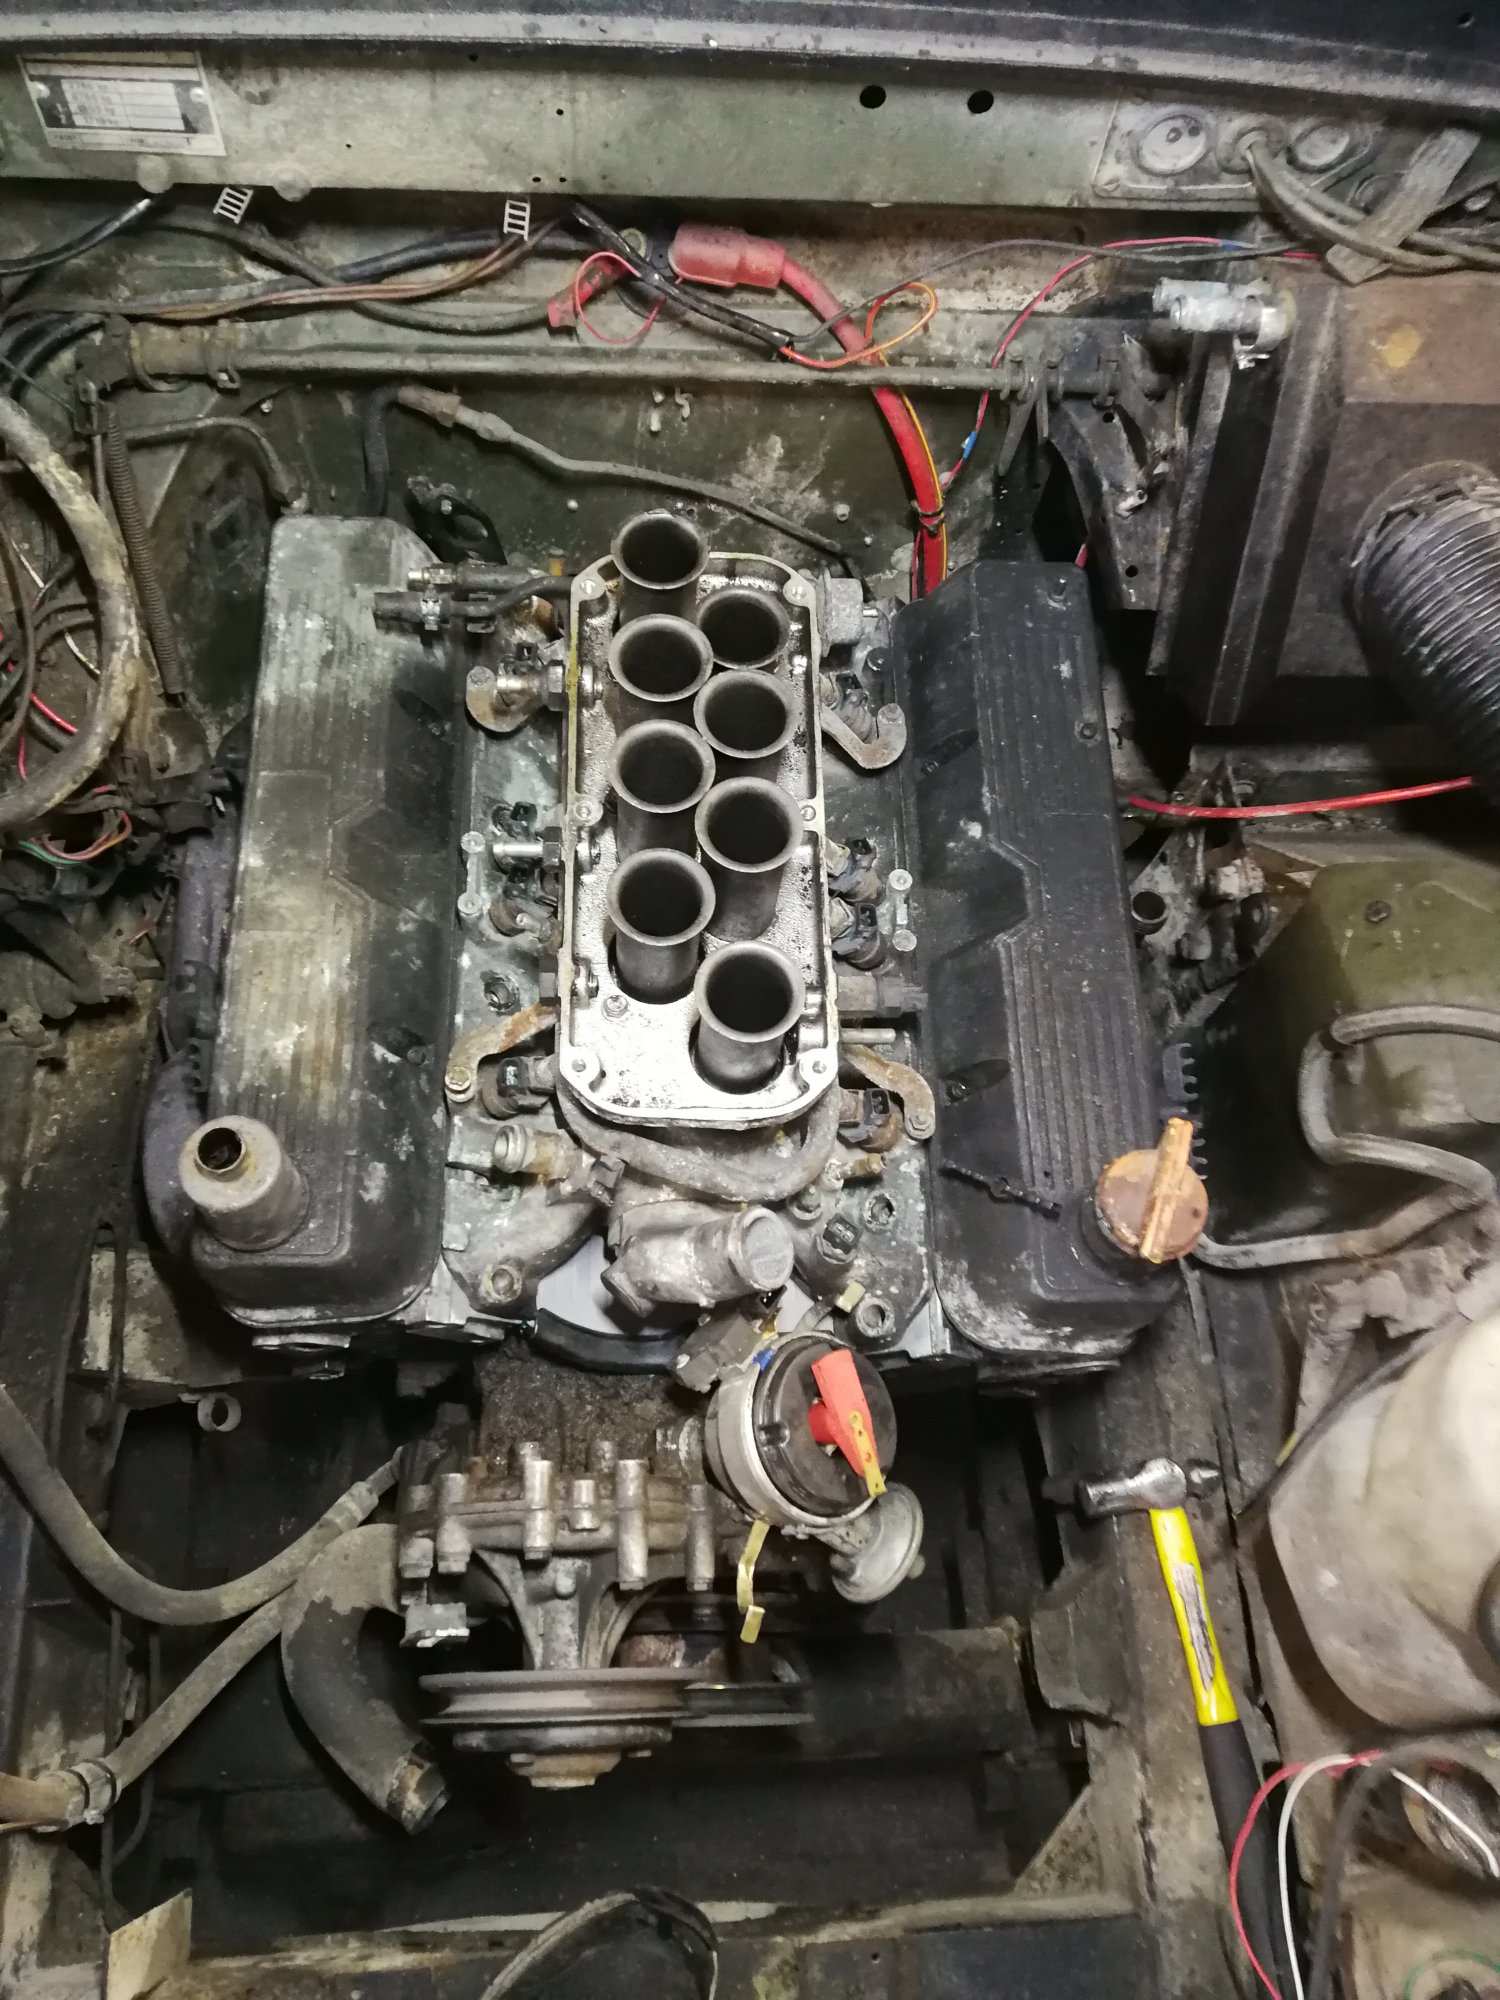 Rover 3.5 V8 injection conversion Land Rover UK Forums